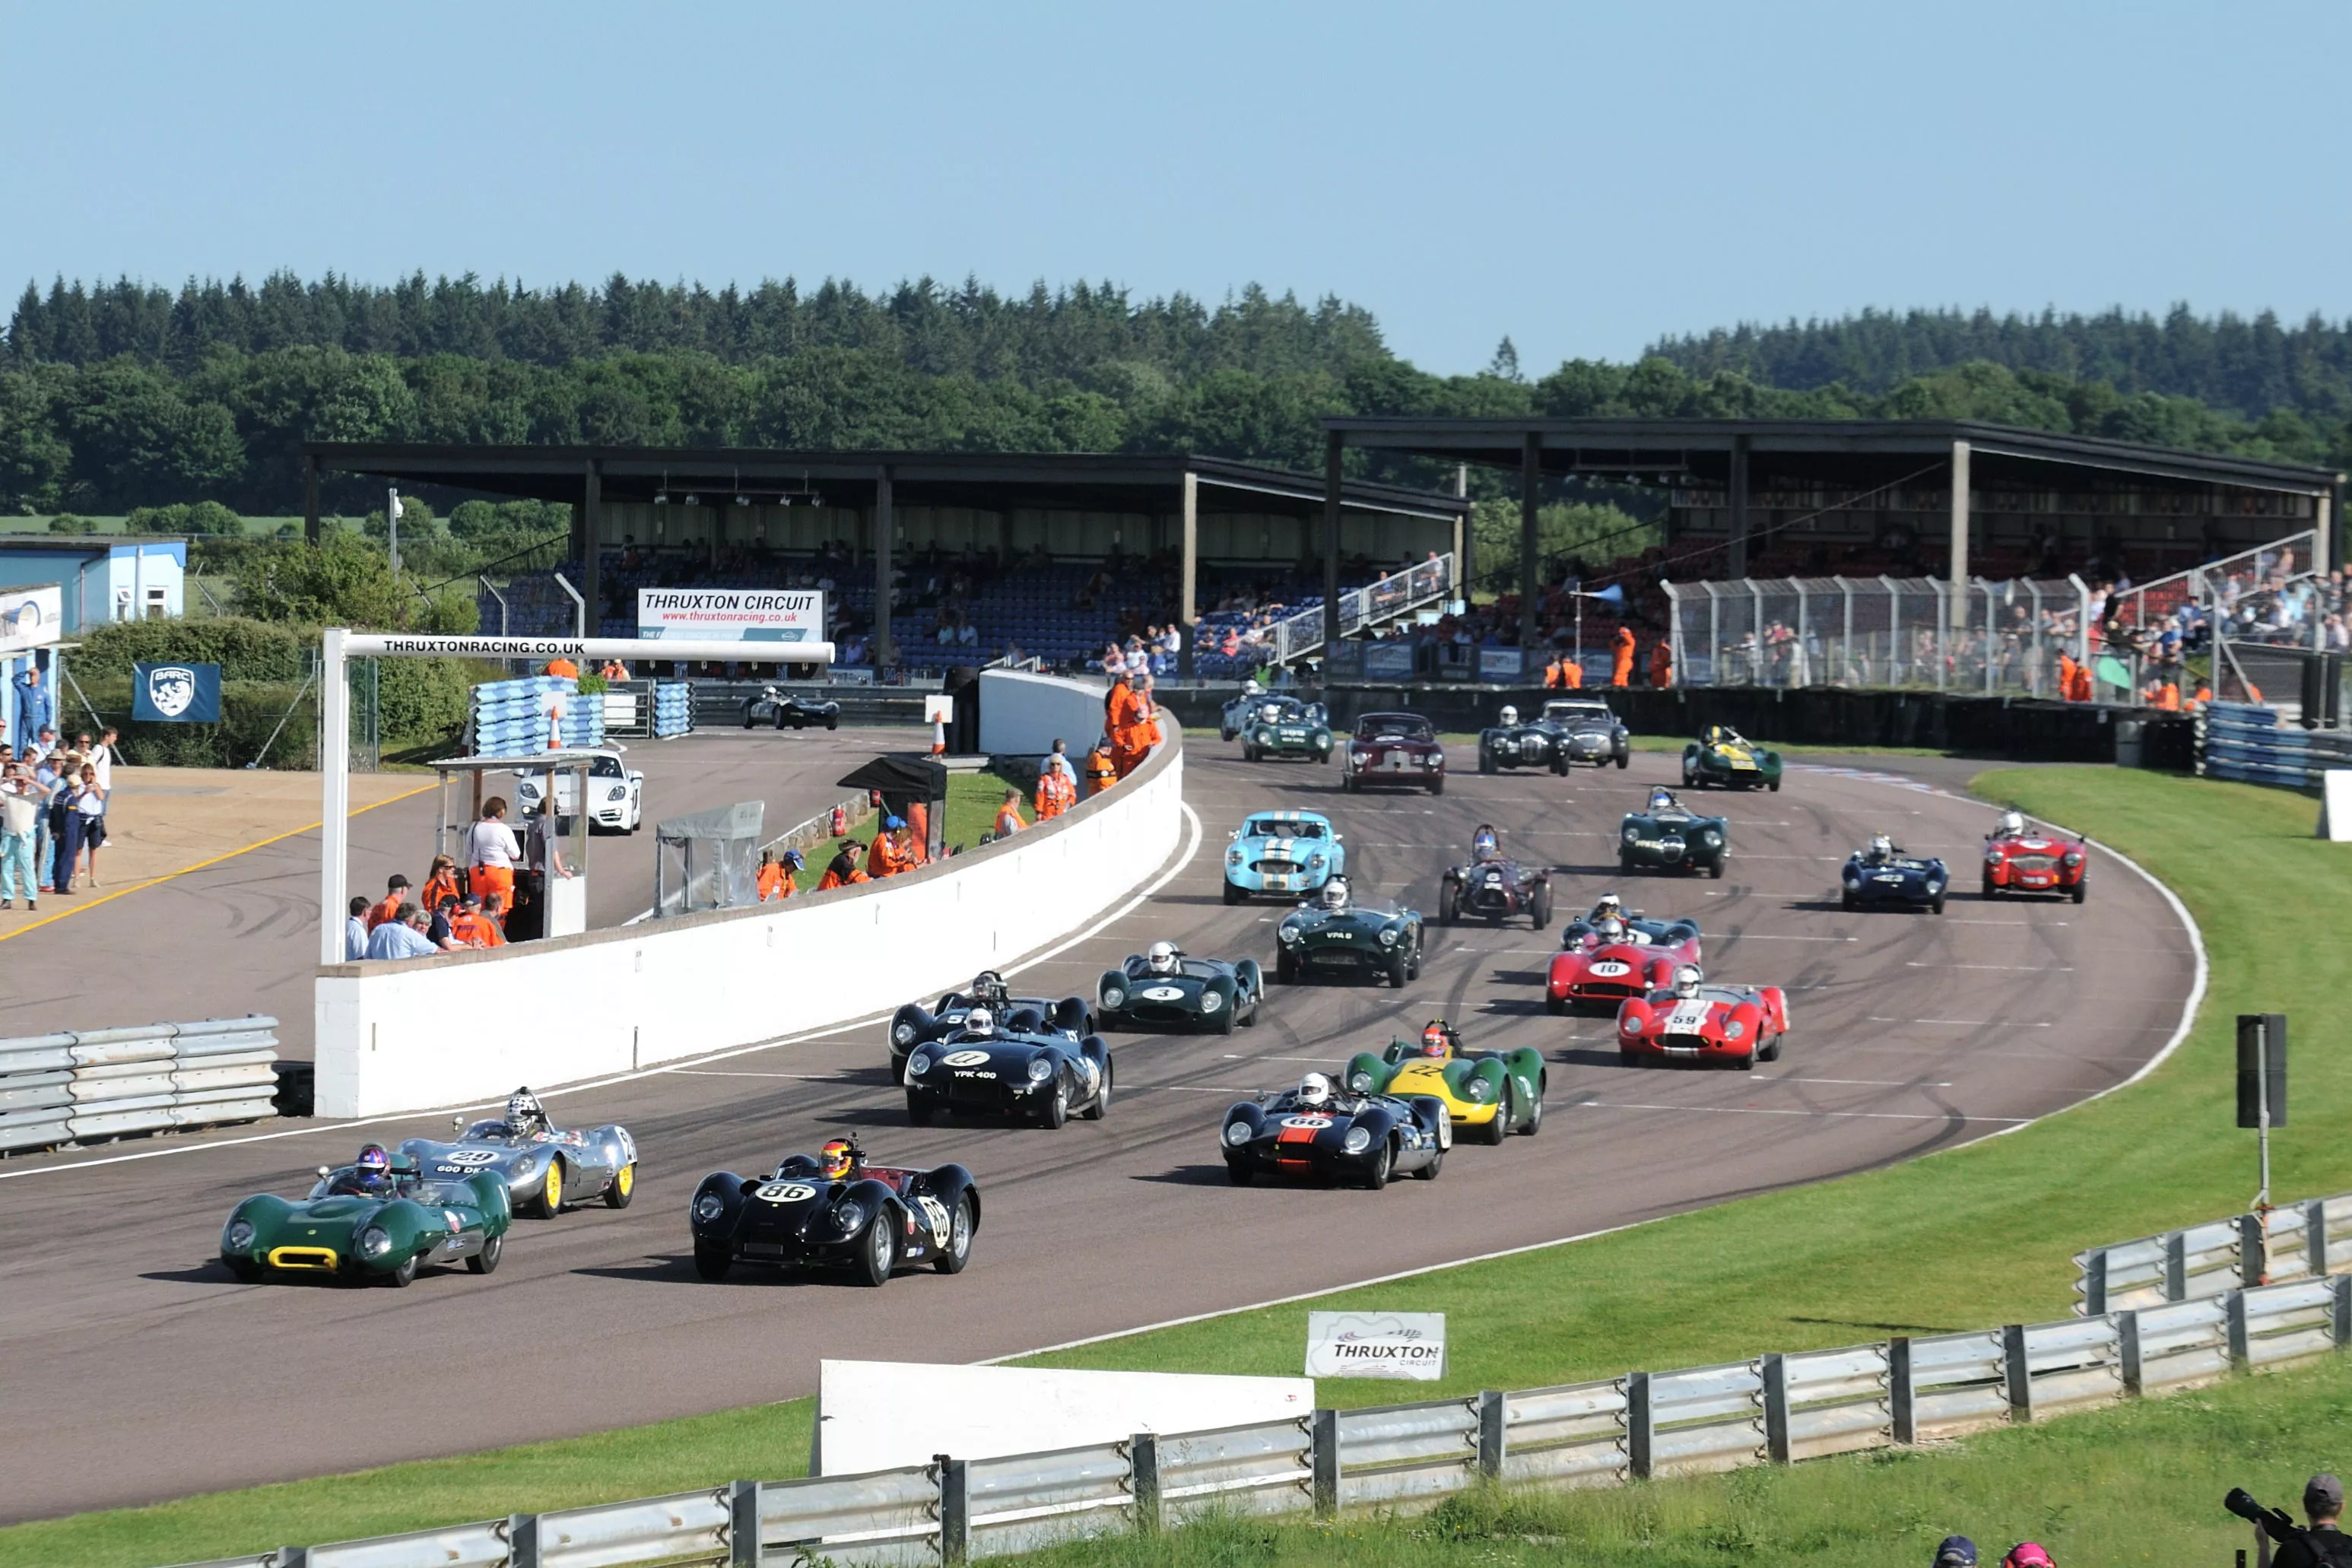 Thruxton Motorsport Center in United Kingdom, Europe | Racing,Motorcycles - Rated 4.8